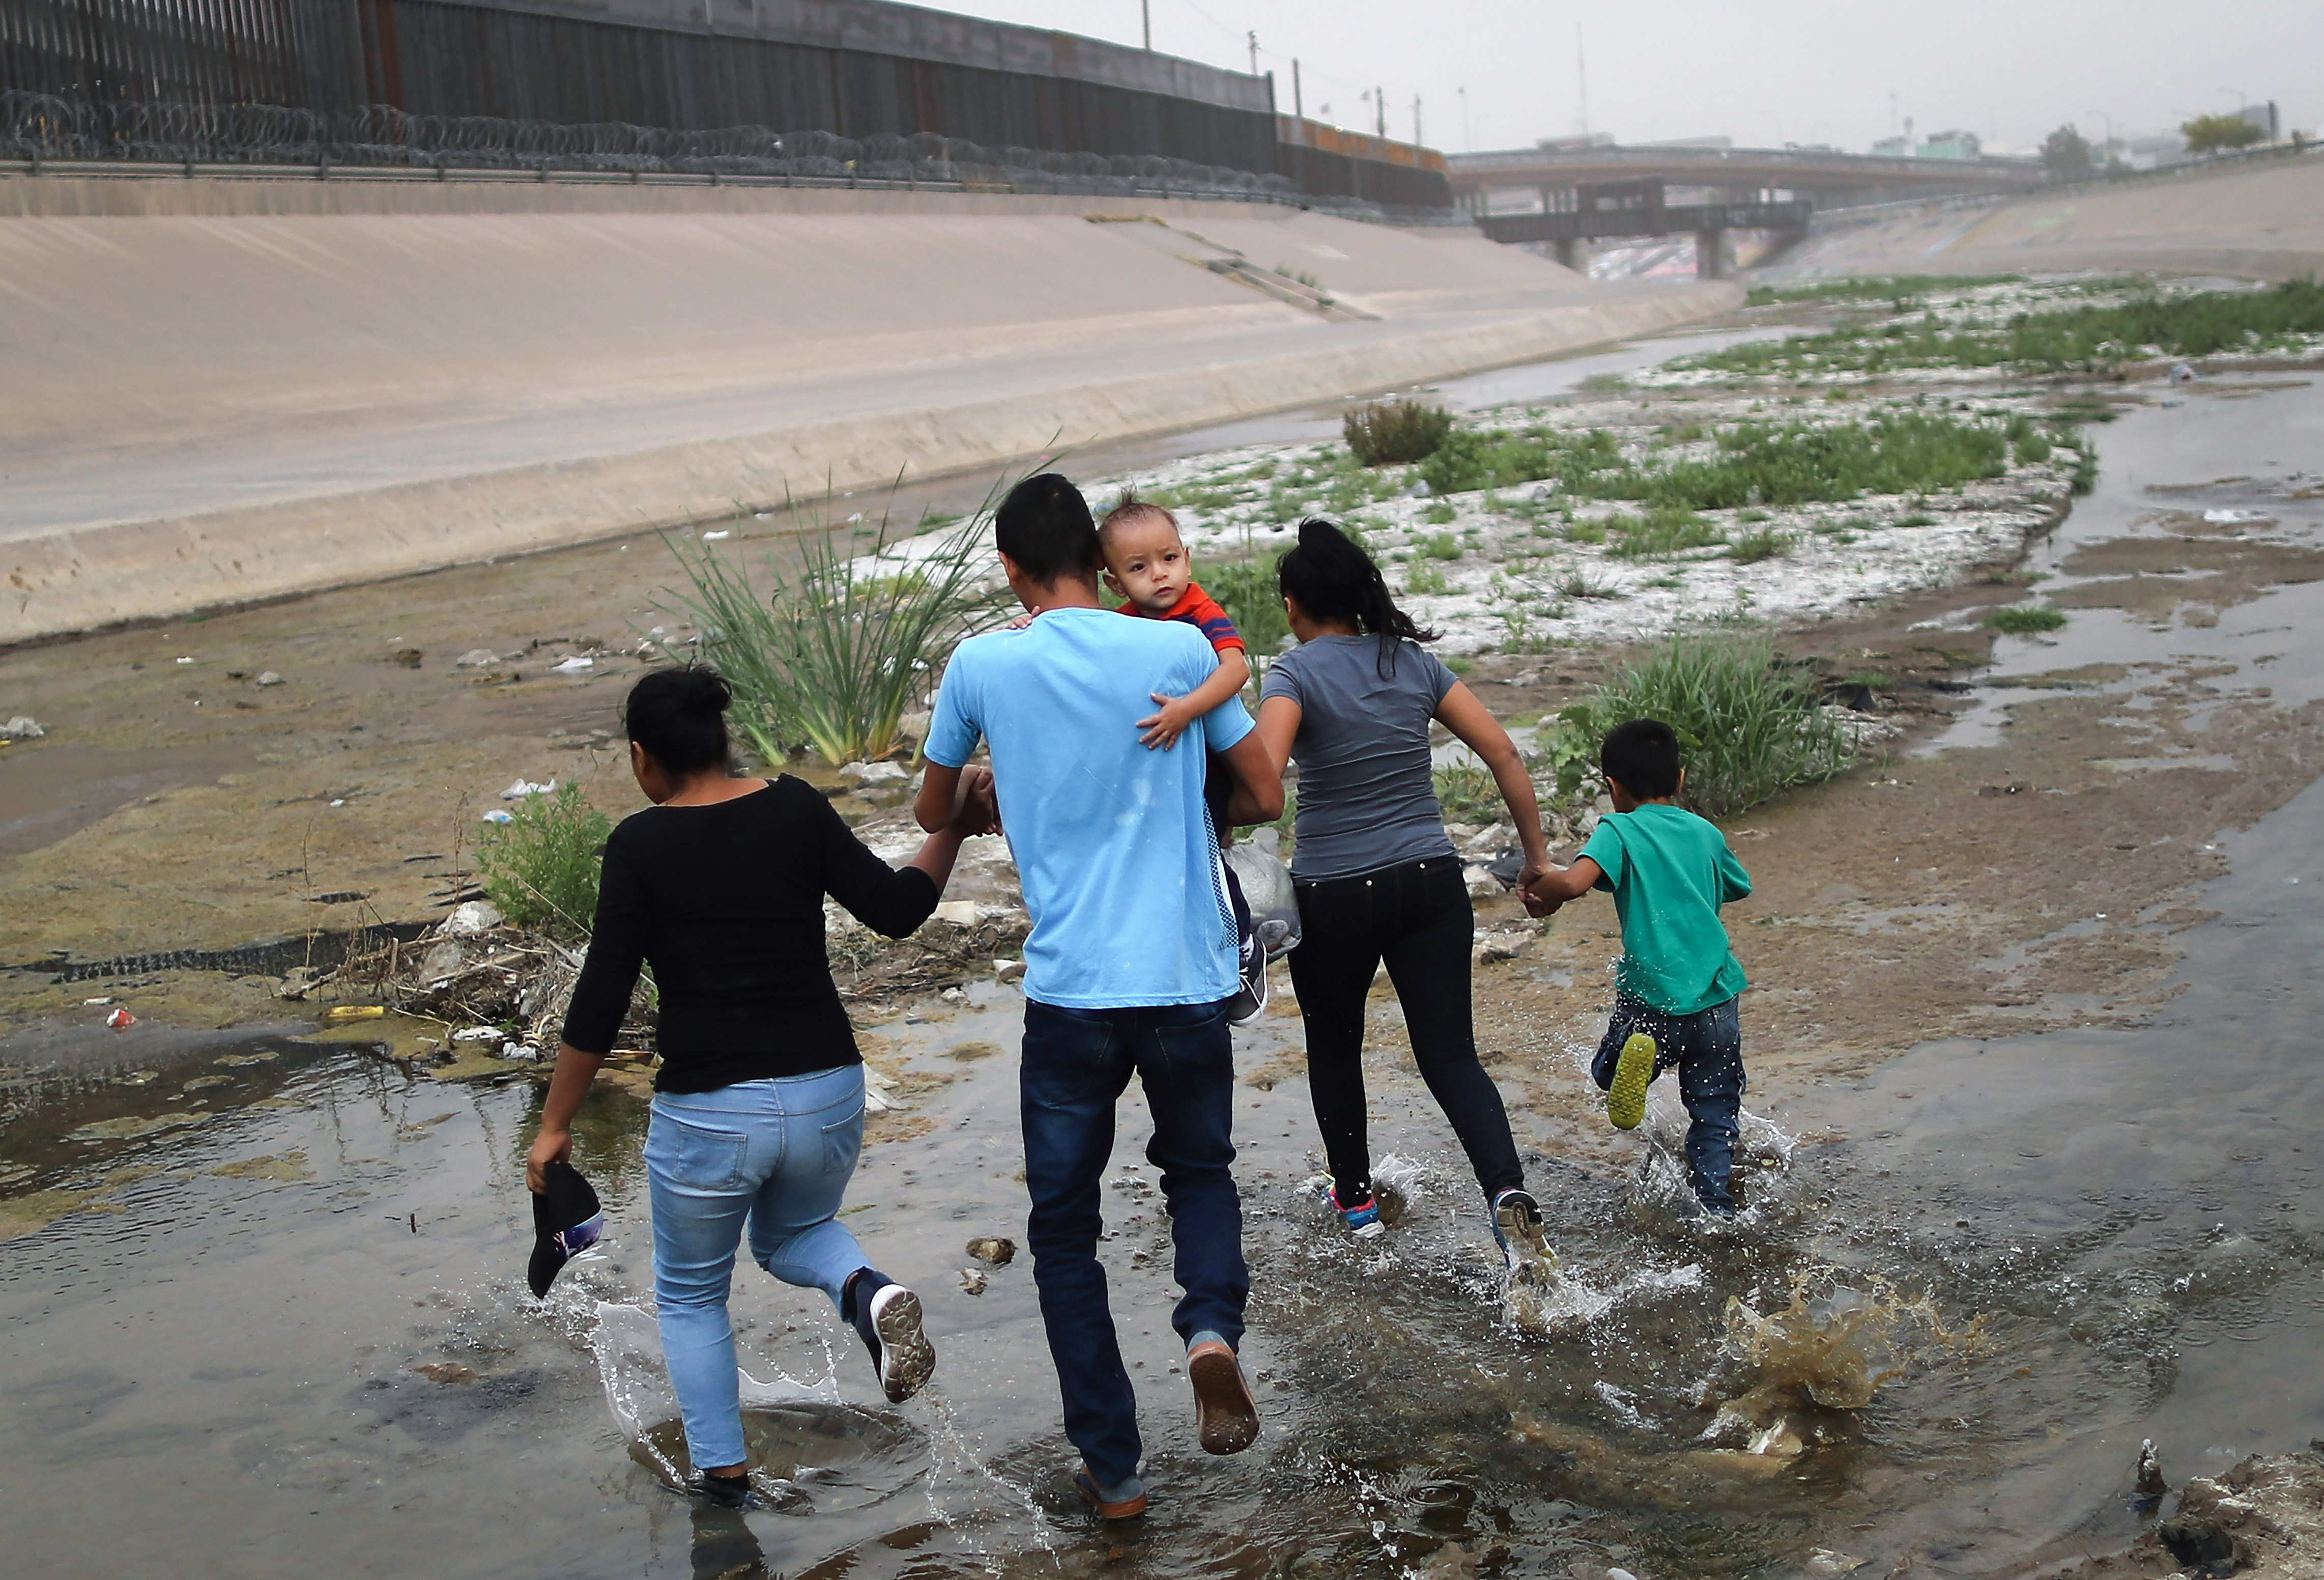 CIUDAD JUAREZ, MEXICO - MAY 20: Migrants hold hands as they cross the border between the U.S. and Mexico at the Rio Grande river, on their way to enter El Paso, Texas, on May 20, 2019 as taken from Ciudad Juarez, Mexico. The location is in an area where migrants frequently turn themselves in and ask for asylum in the U.S. after crossing the border. Approximately 1,000 migrants per day are being released by authorities in the El Paso sector of the U.S.-Mexico border amidst a surge in asylum seekers arriving at the Southern border.